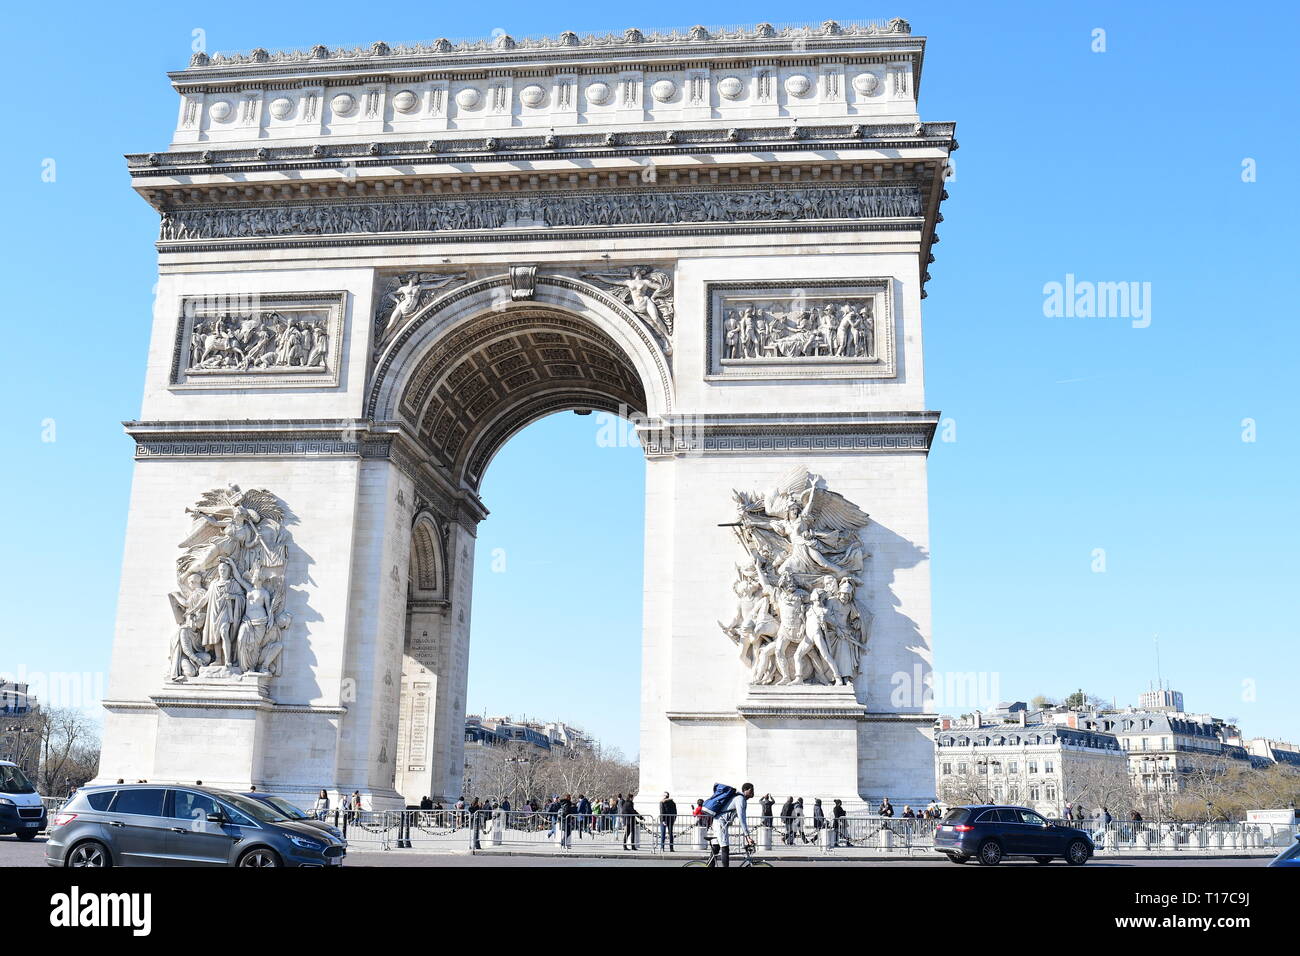 PARIS-FRANCE-JANUARY 19, 2017:Arc de Triomphe is one of the most famous monuments in Paris, standing at the western end of the Champs-Élysées at the c Stock Photo